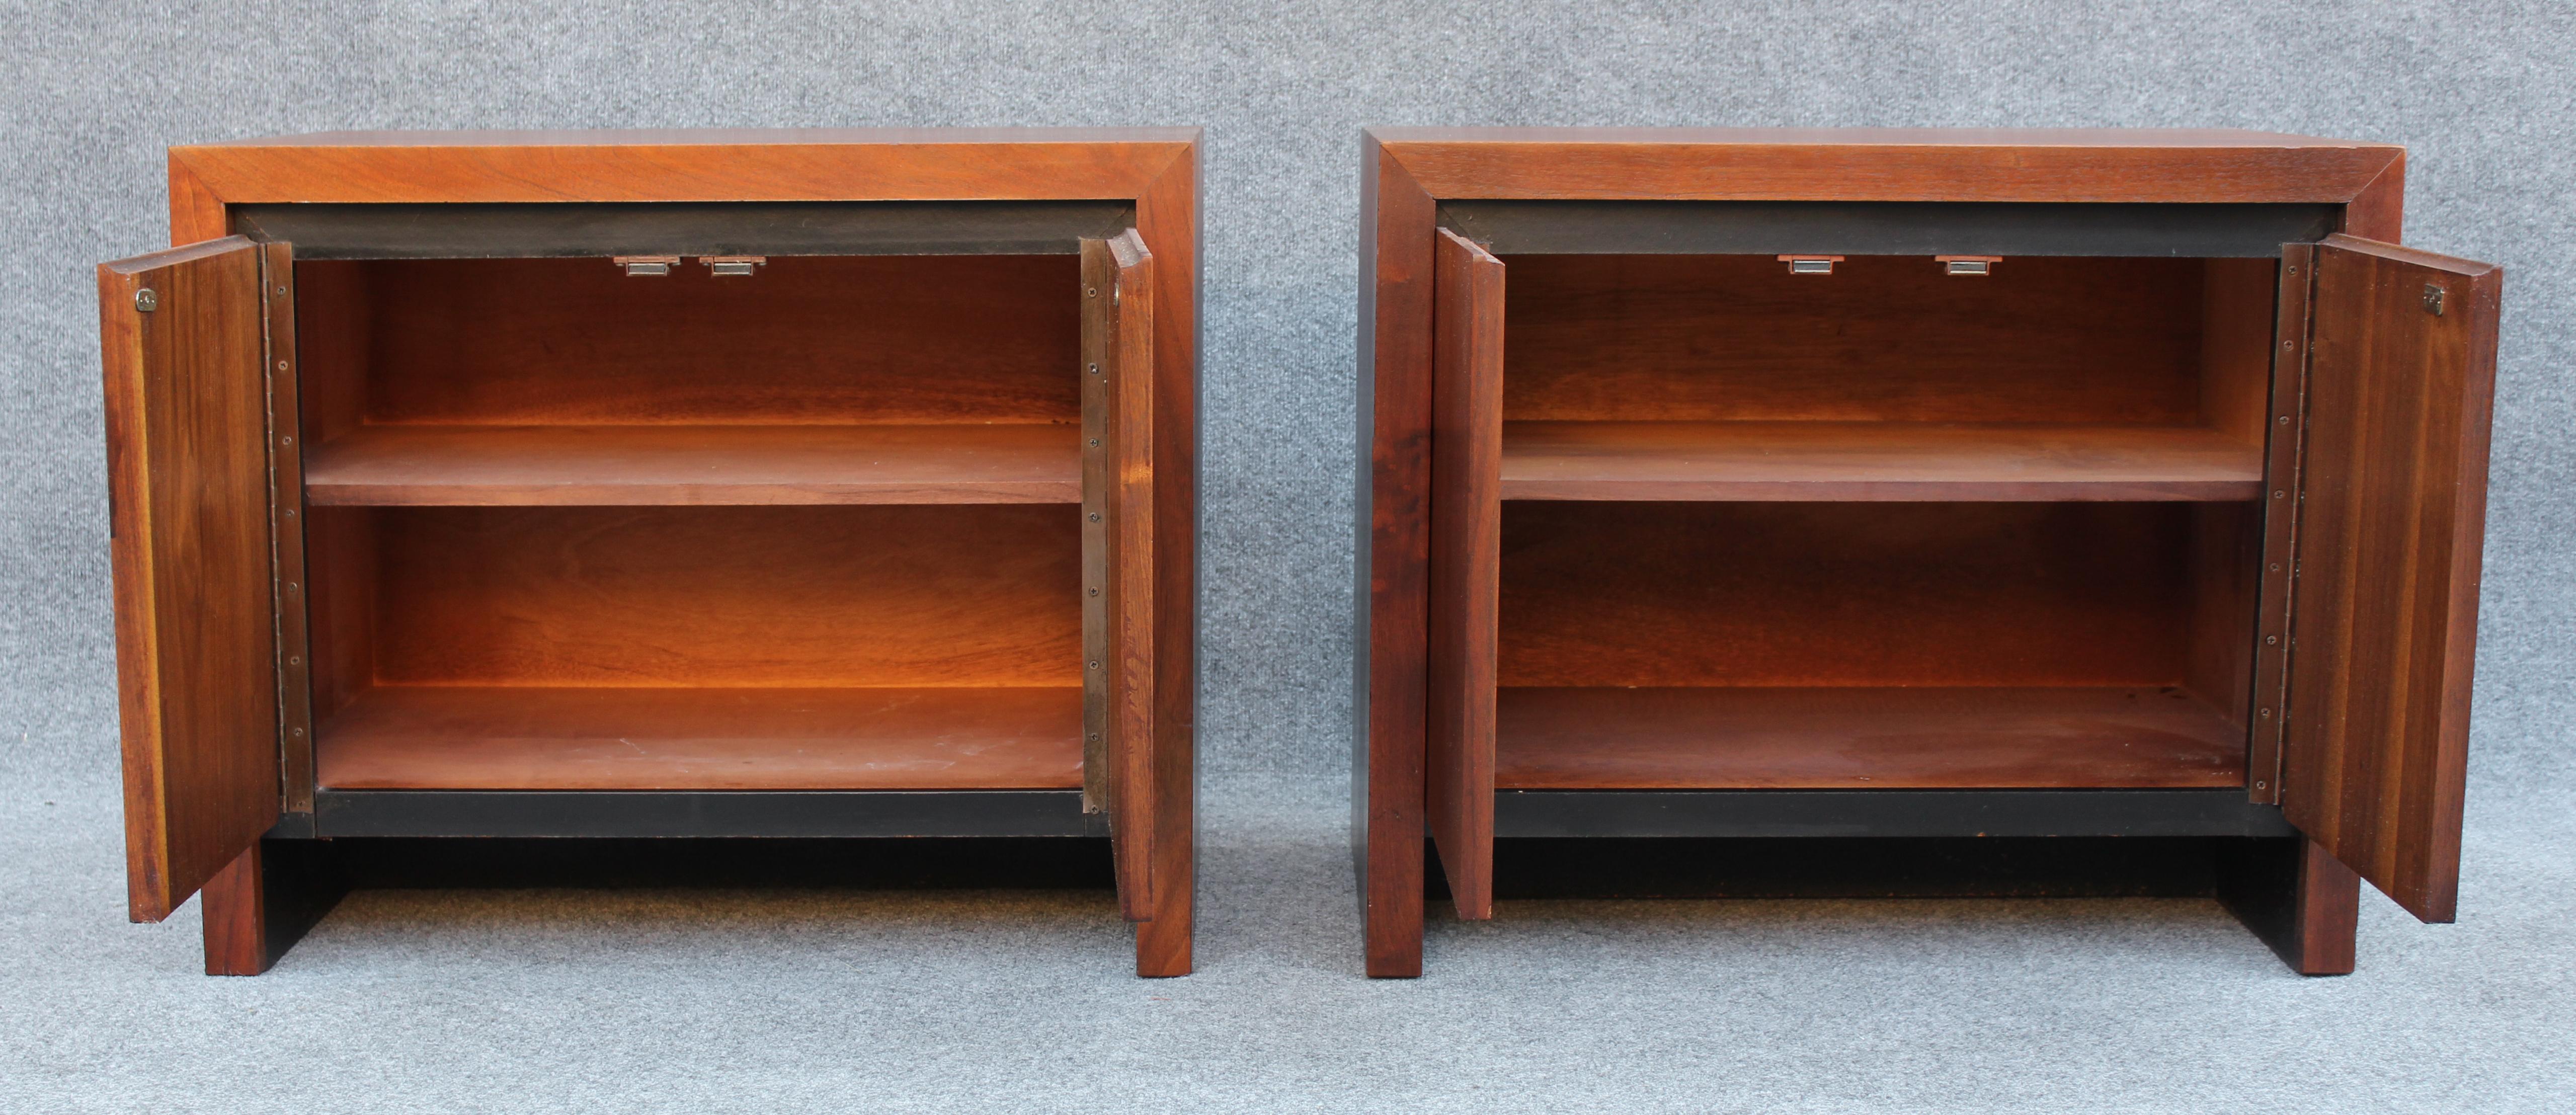 Pair of Dillingham Nightstands or End Tables in Bookmatched Walnut For Sale 4